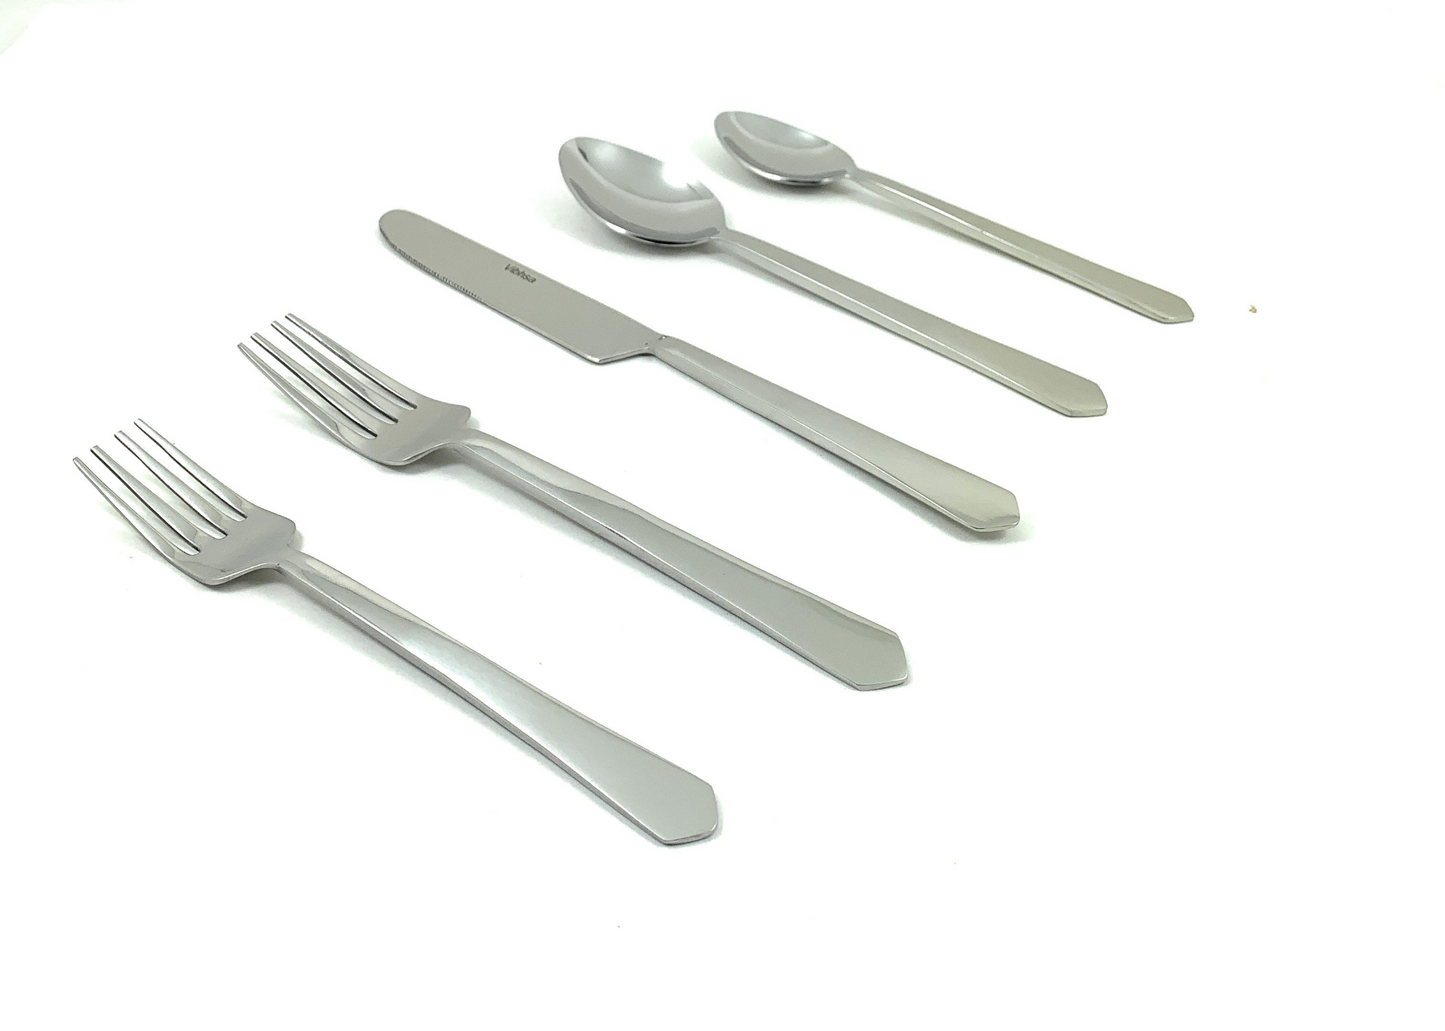 Flatware set of 20 Pieces in Silver Stainless Steel